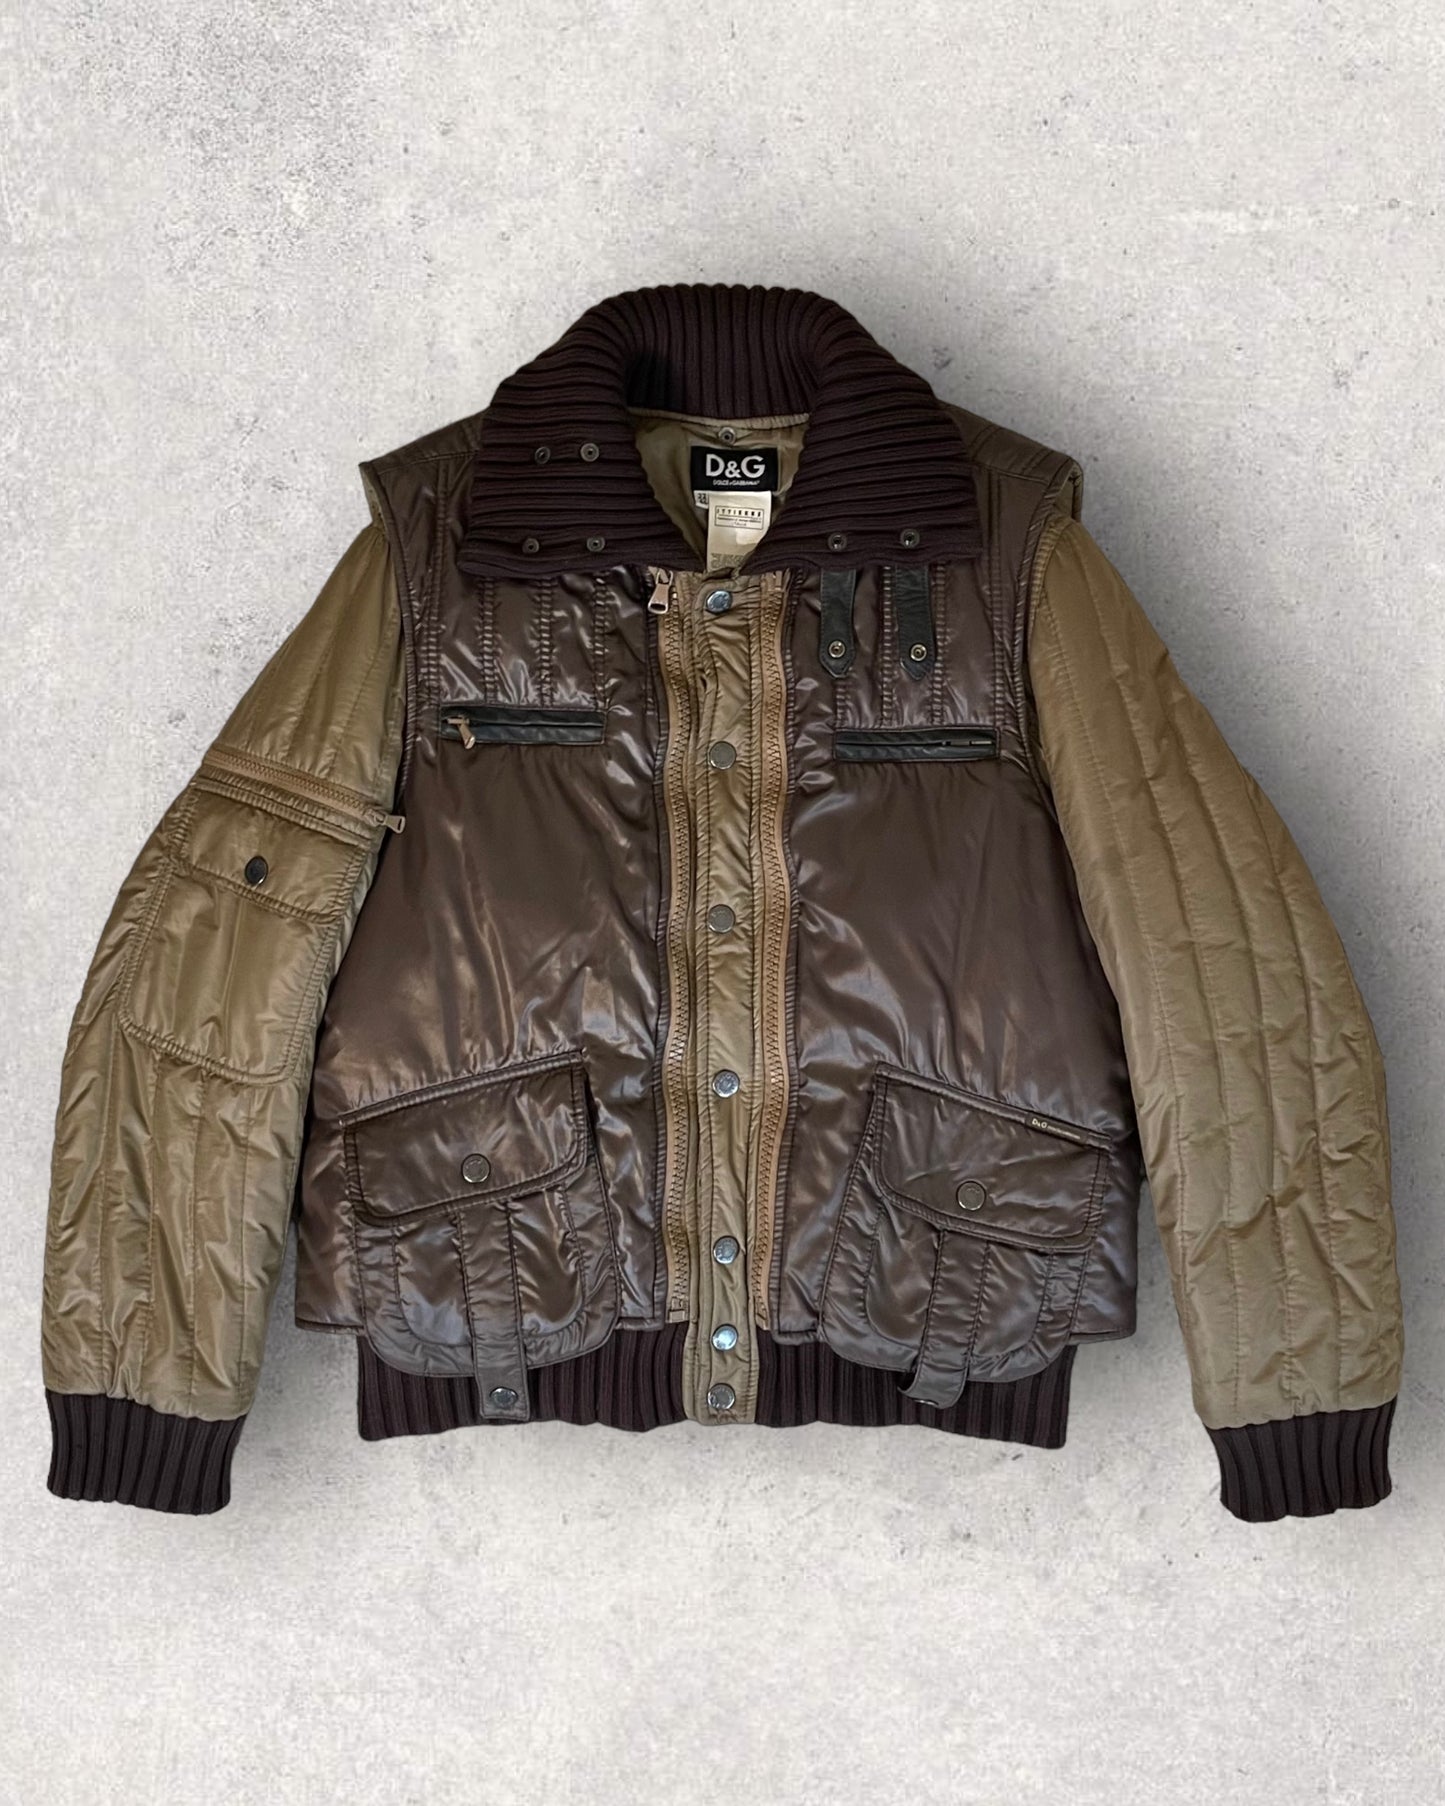 AW04 Dolce & Gabbana 2-in-1 High-Neck Bomber Jacket with detachable Vest (M)